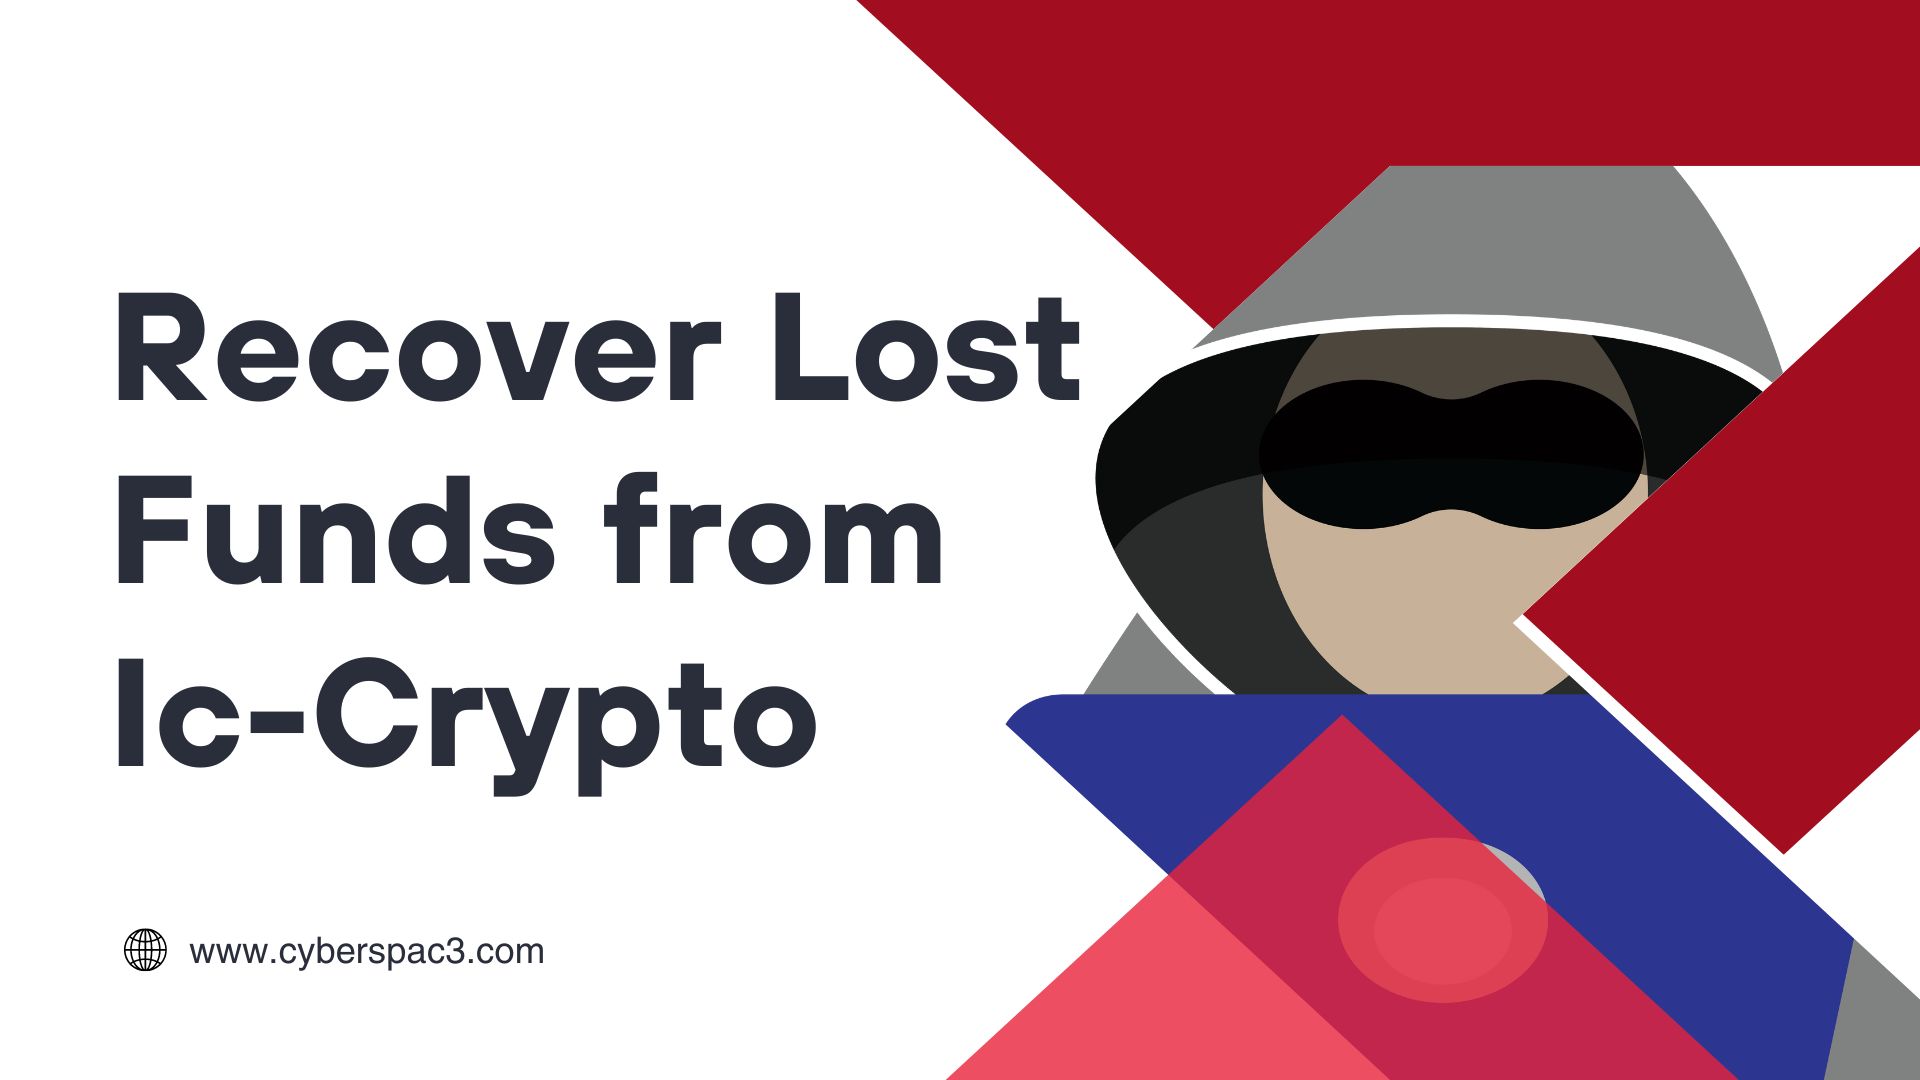 Recover Lost Funds from Ic-Crypto